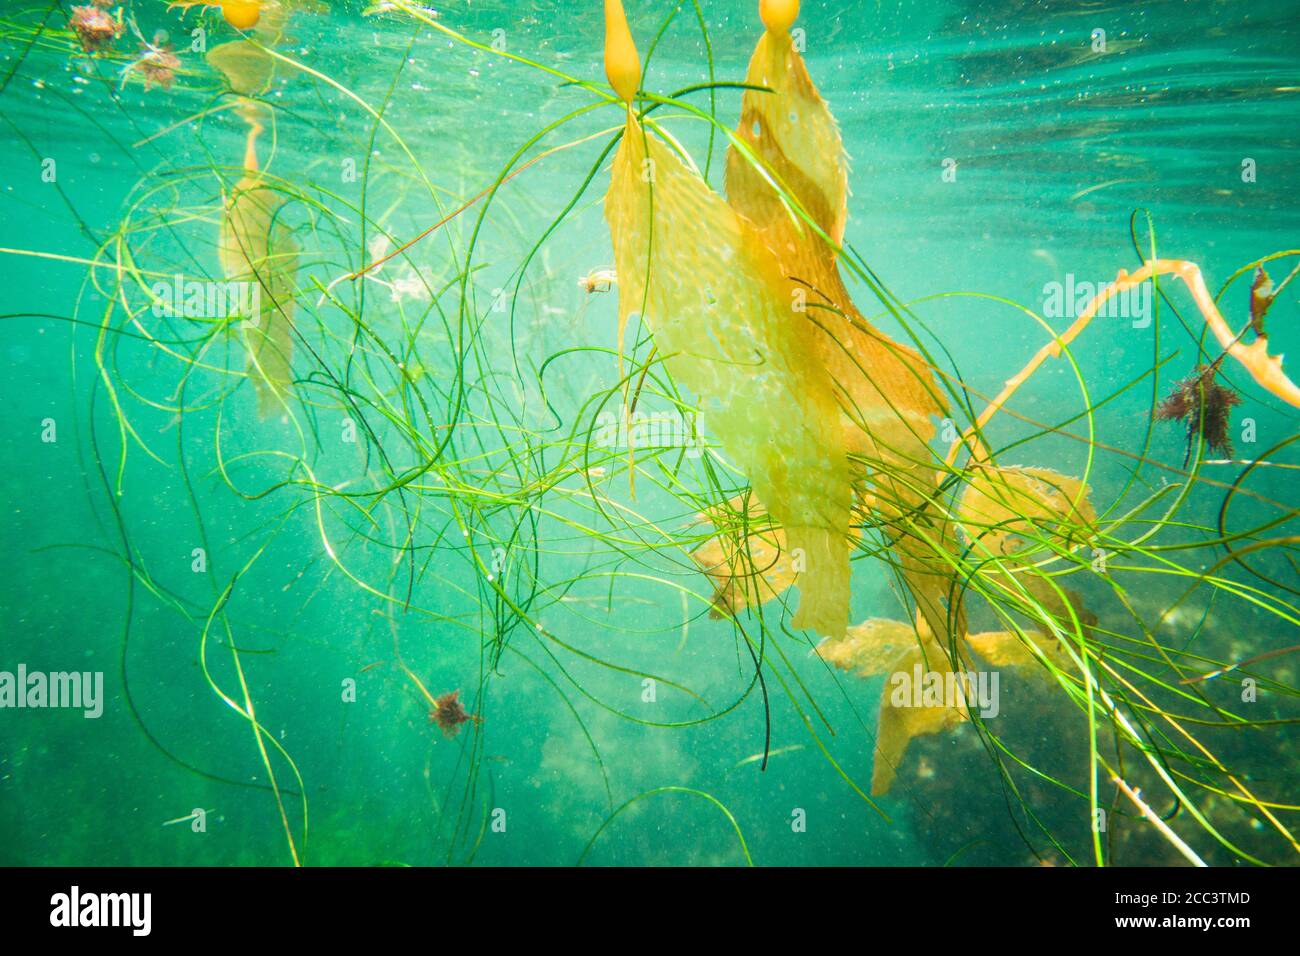 Blades of sea grass and kelp floating at the surface in La Jolla Cove, San Diego, California. Stock Photo